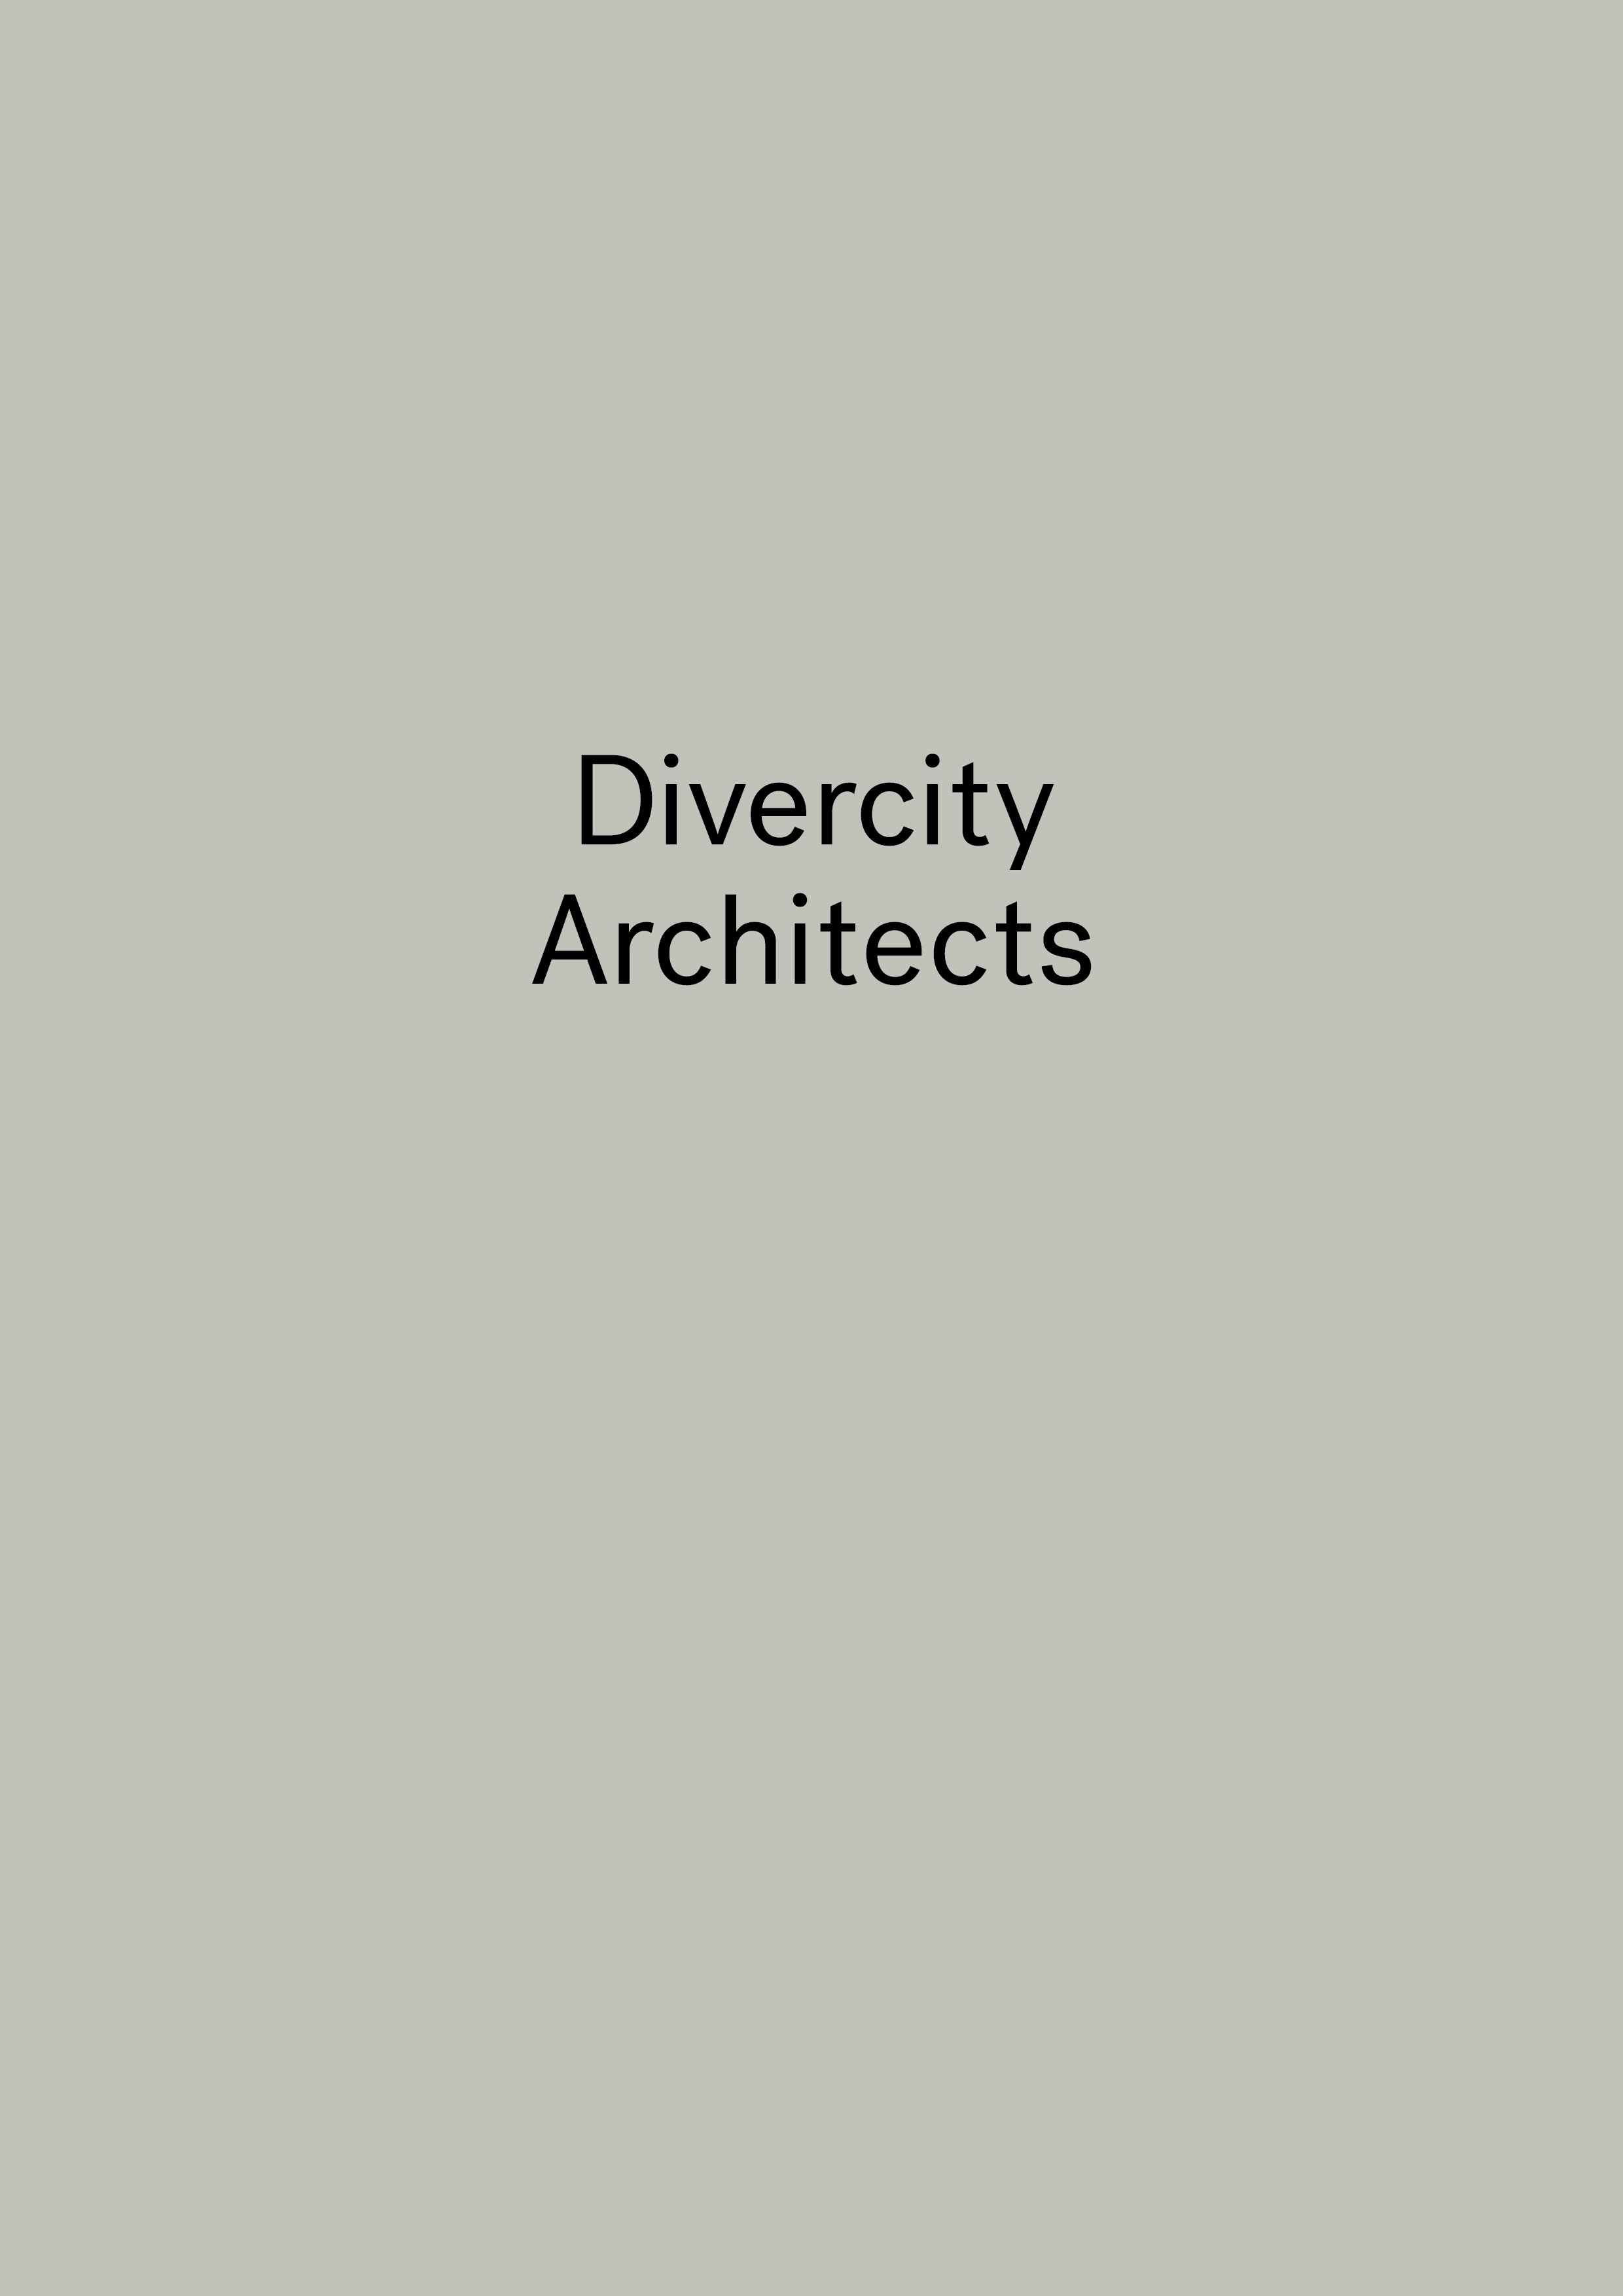 01_DivercityArchitects_cover